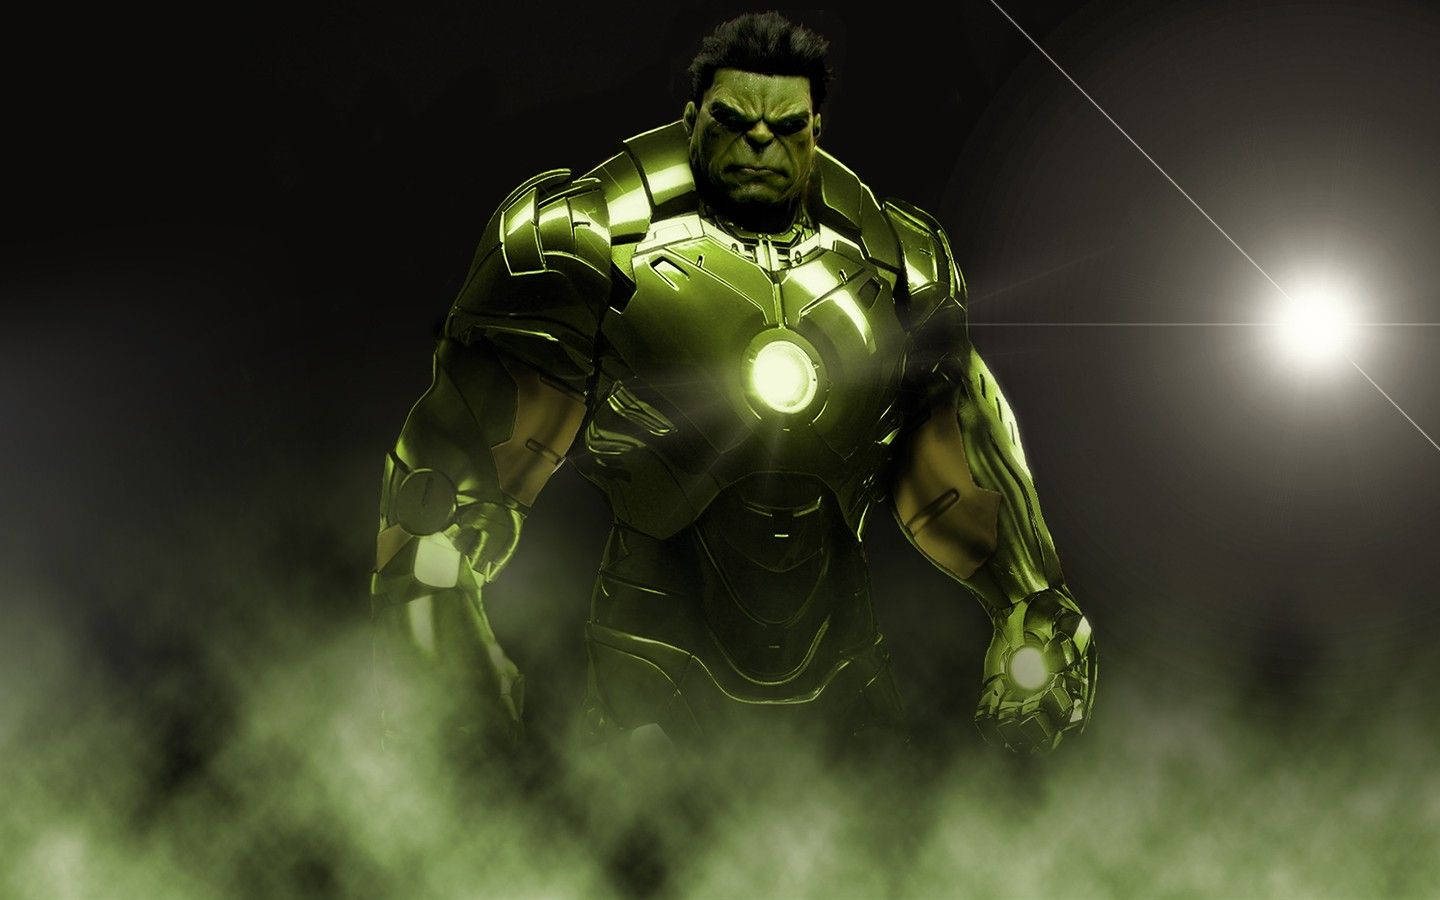 Incredible Hulk In Ironman Suit Background